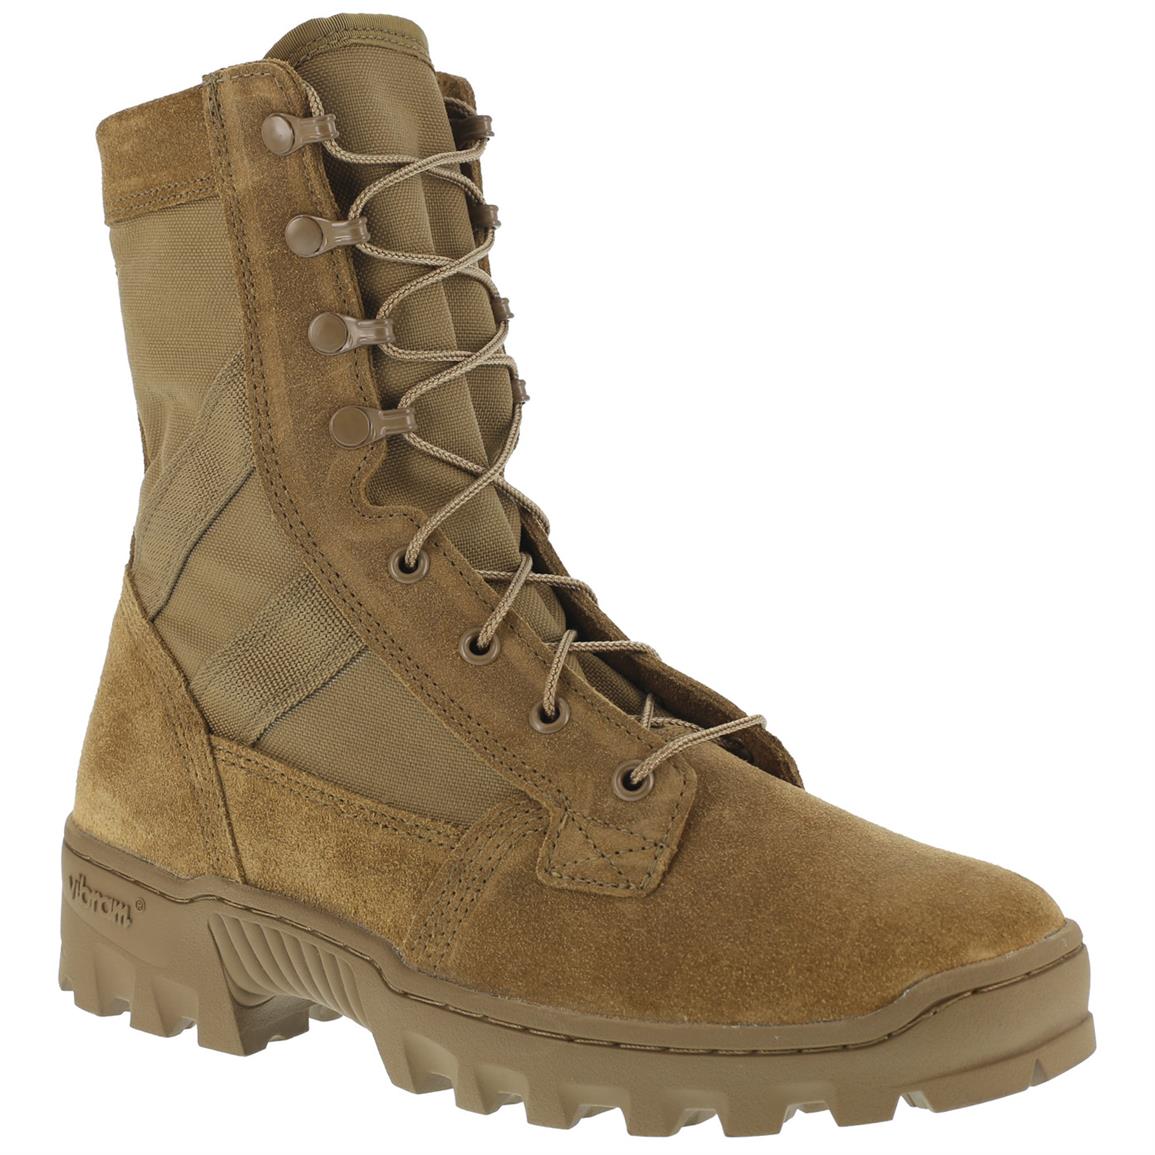 Army Reebok Boots - Army Military